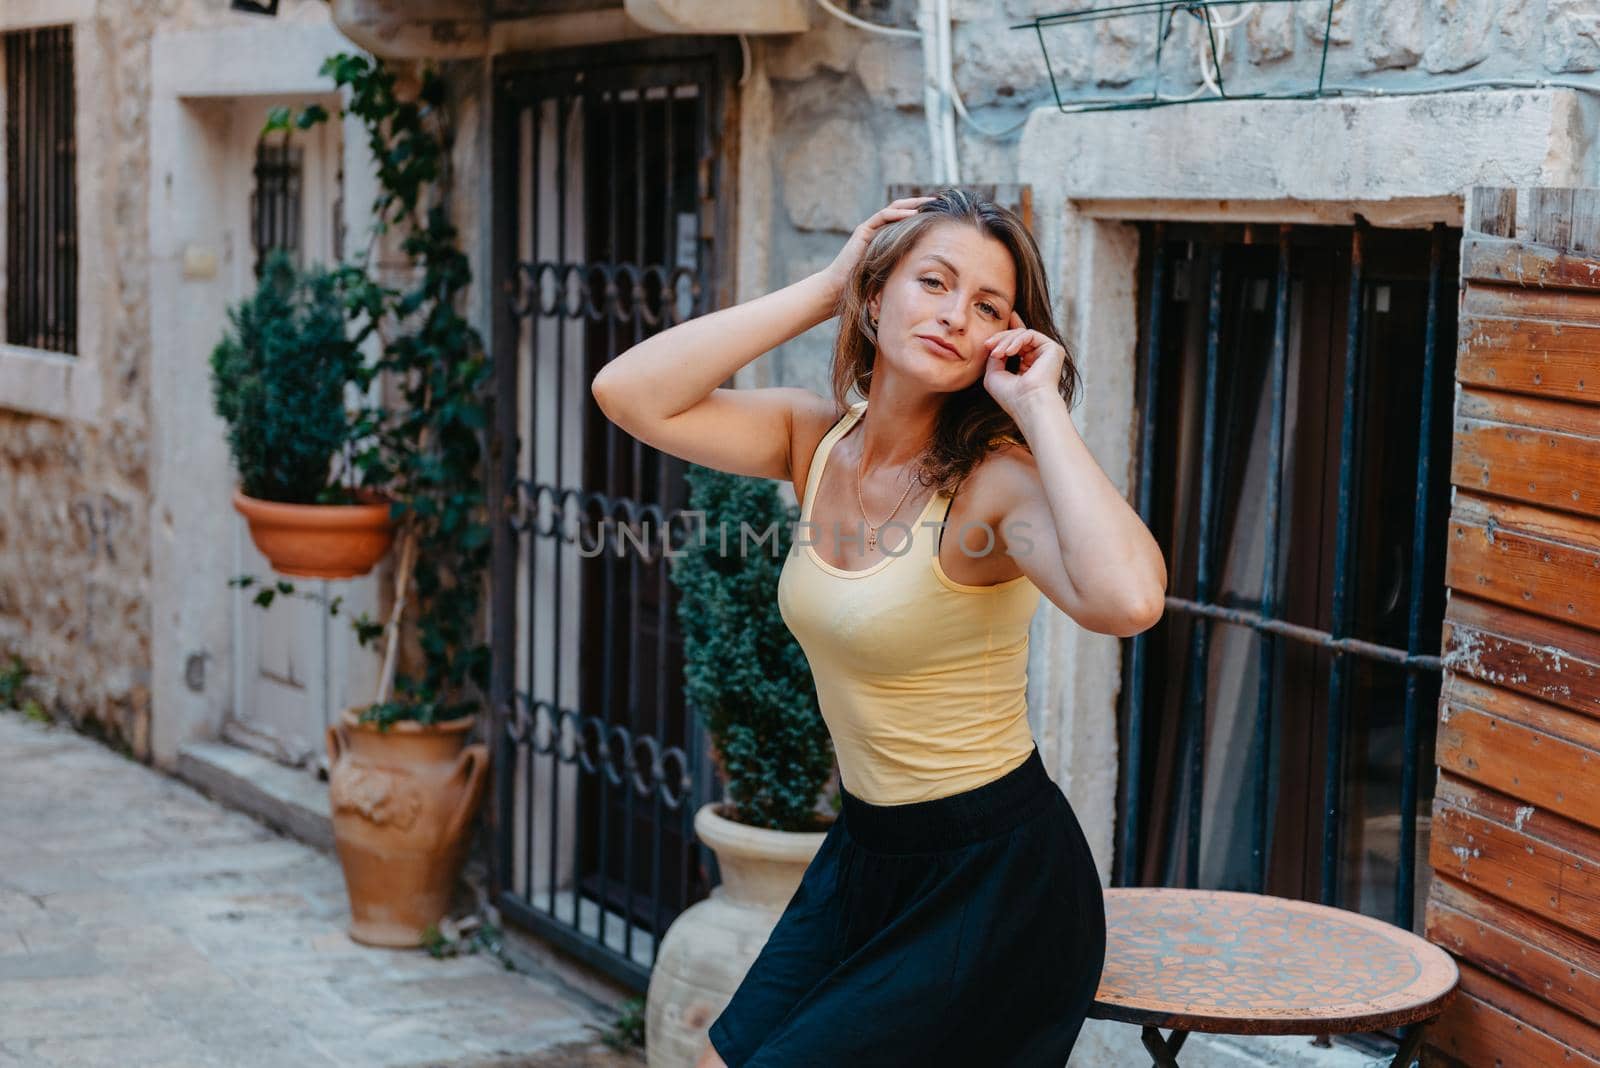 Girl Tourist Walking Through Ancient Narrow Street On A Beautiful Summer Day In MEDITERRANEAN MEDIEVAL CITY, OLD TOWN BUDVA, MONTENEGRO. Young Beautiful Cheerful Woman Walking On Old Street At Tropical Town. Pretty Girl Looking At You And Smiling by Andrii_Ko